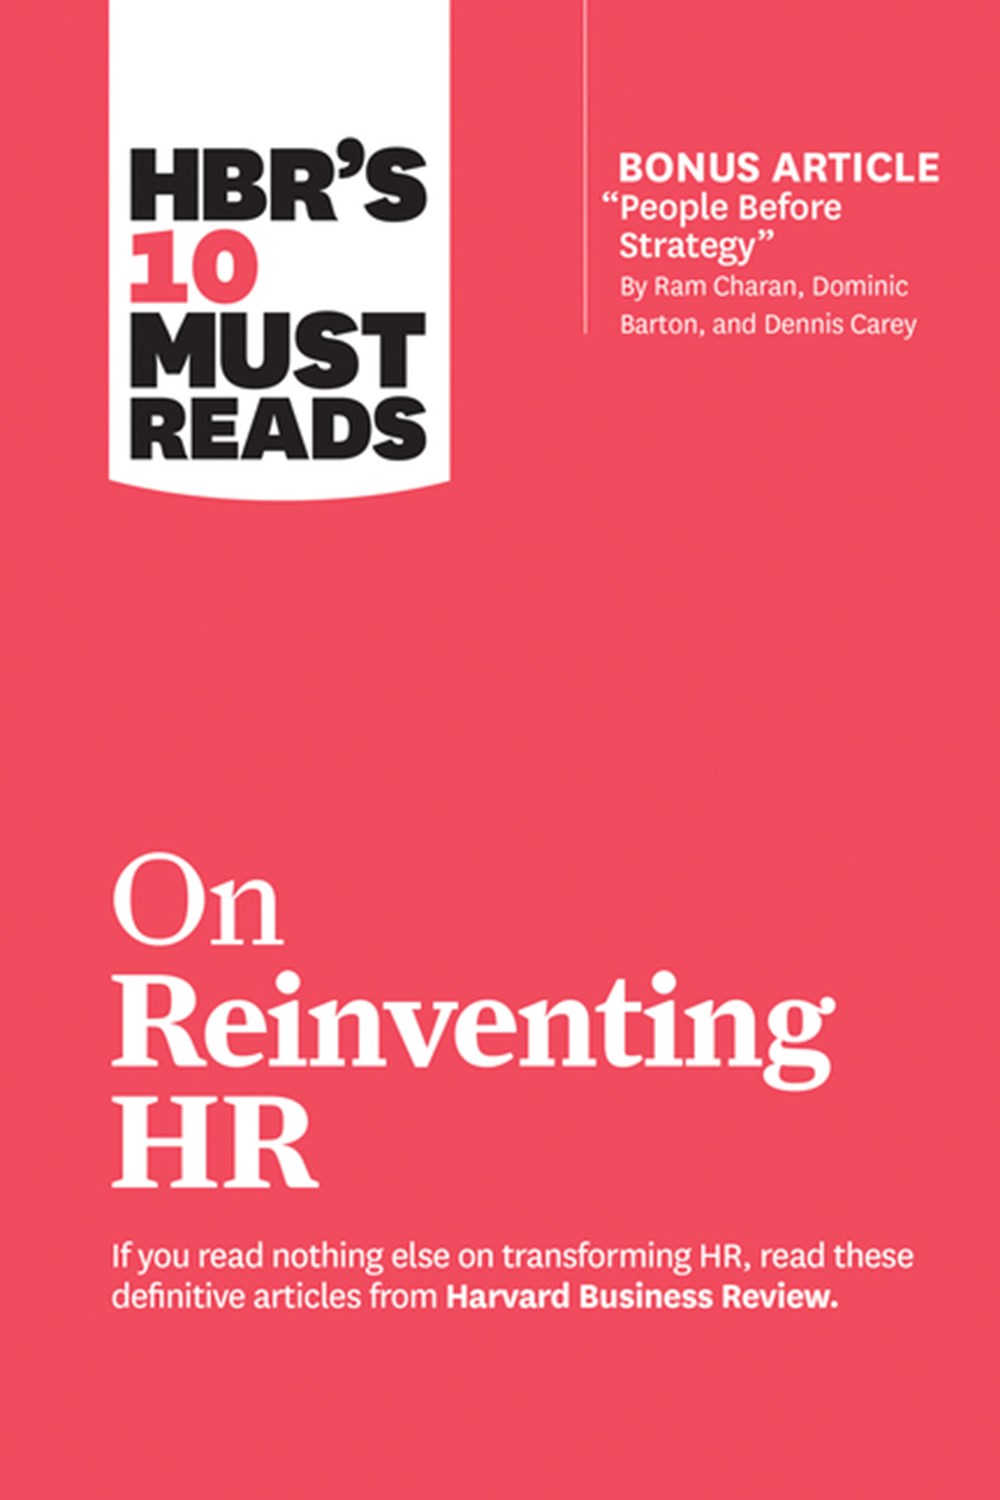 Hbr's 10 Must Reads on Reinventing HR (with Bonus Article "people Before Strategy" by RAM Charan, Do